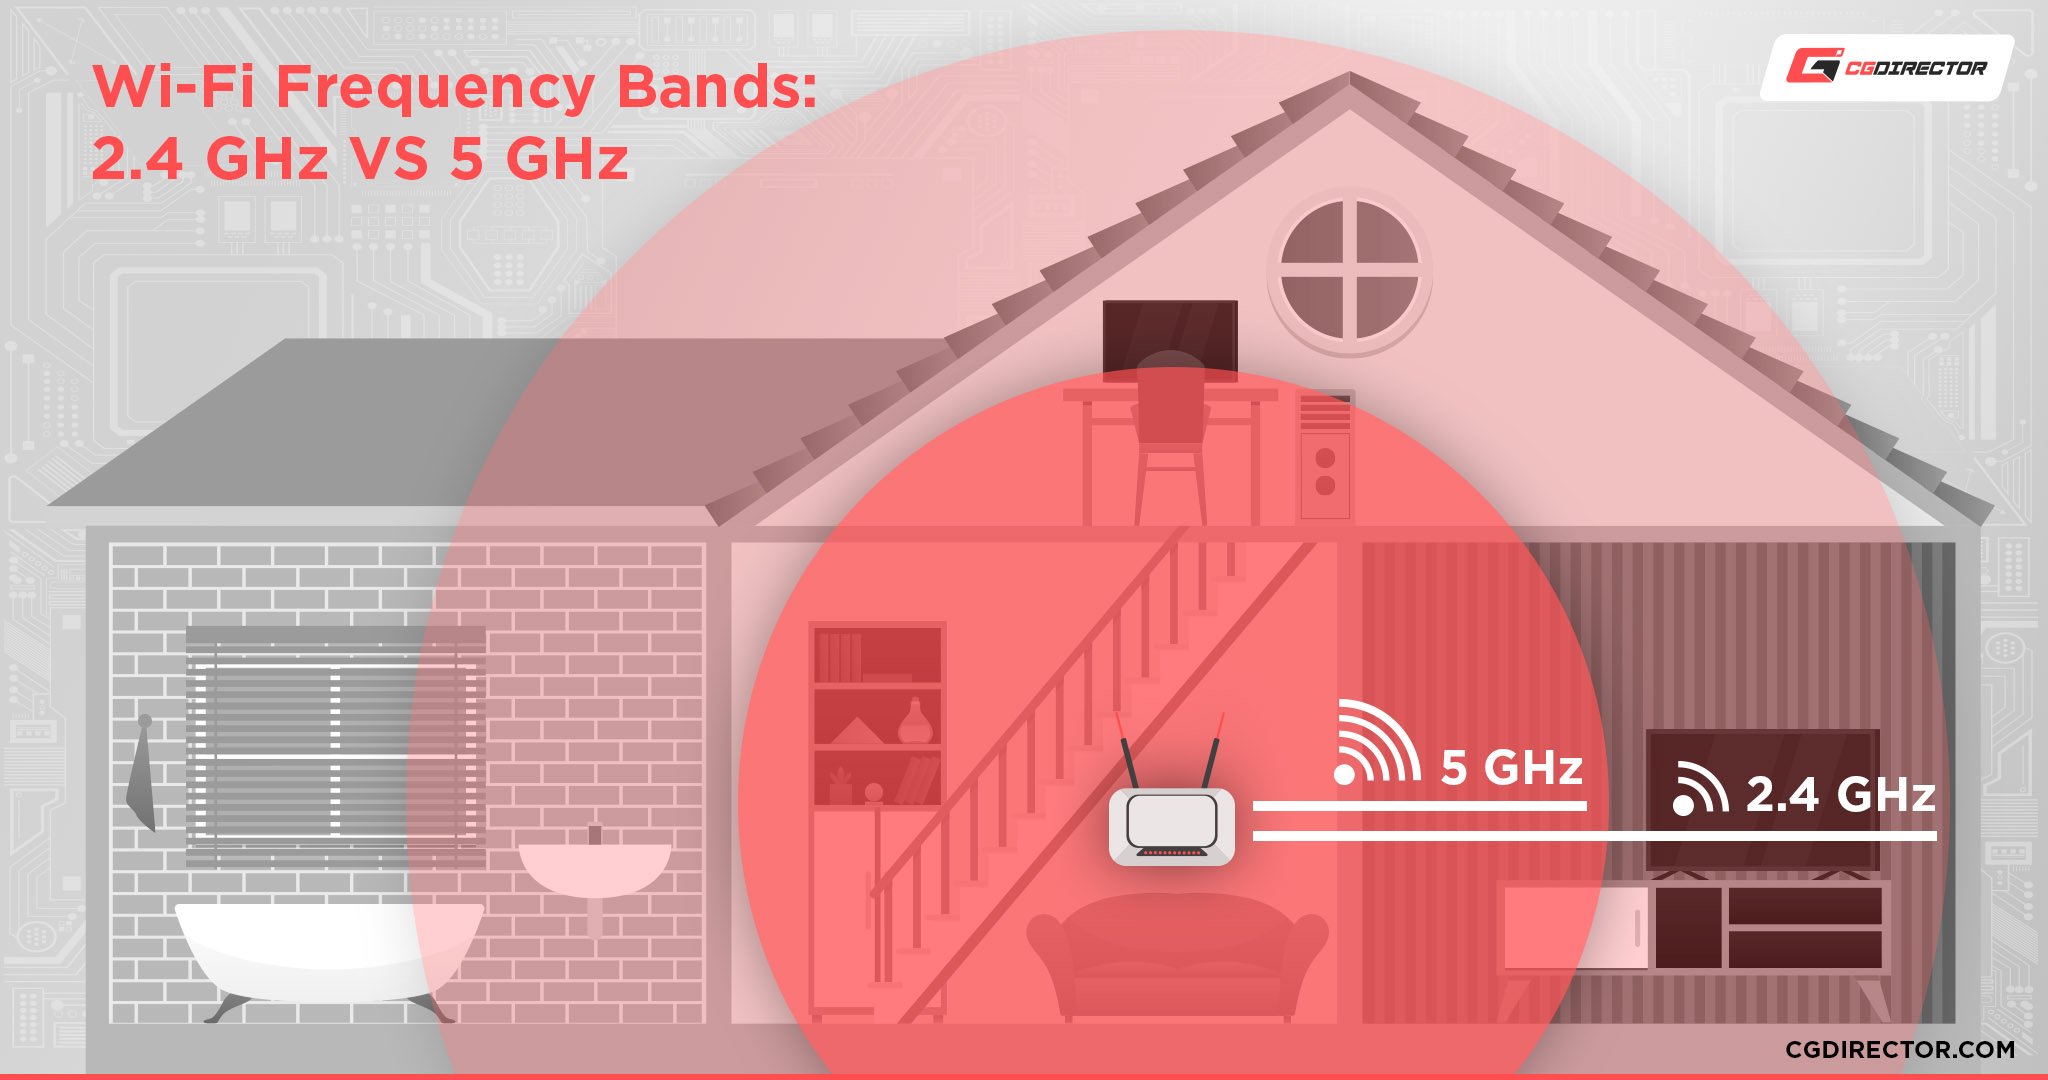 Wi-Fi Frequency Bands